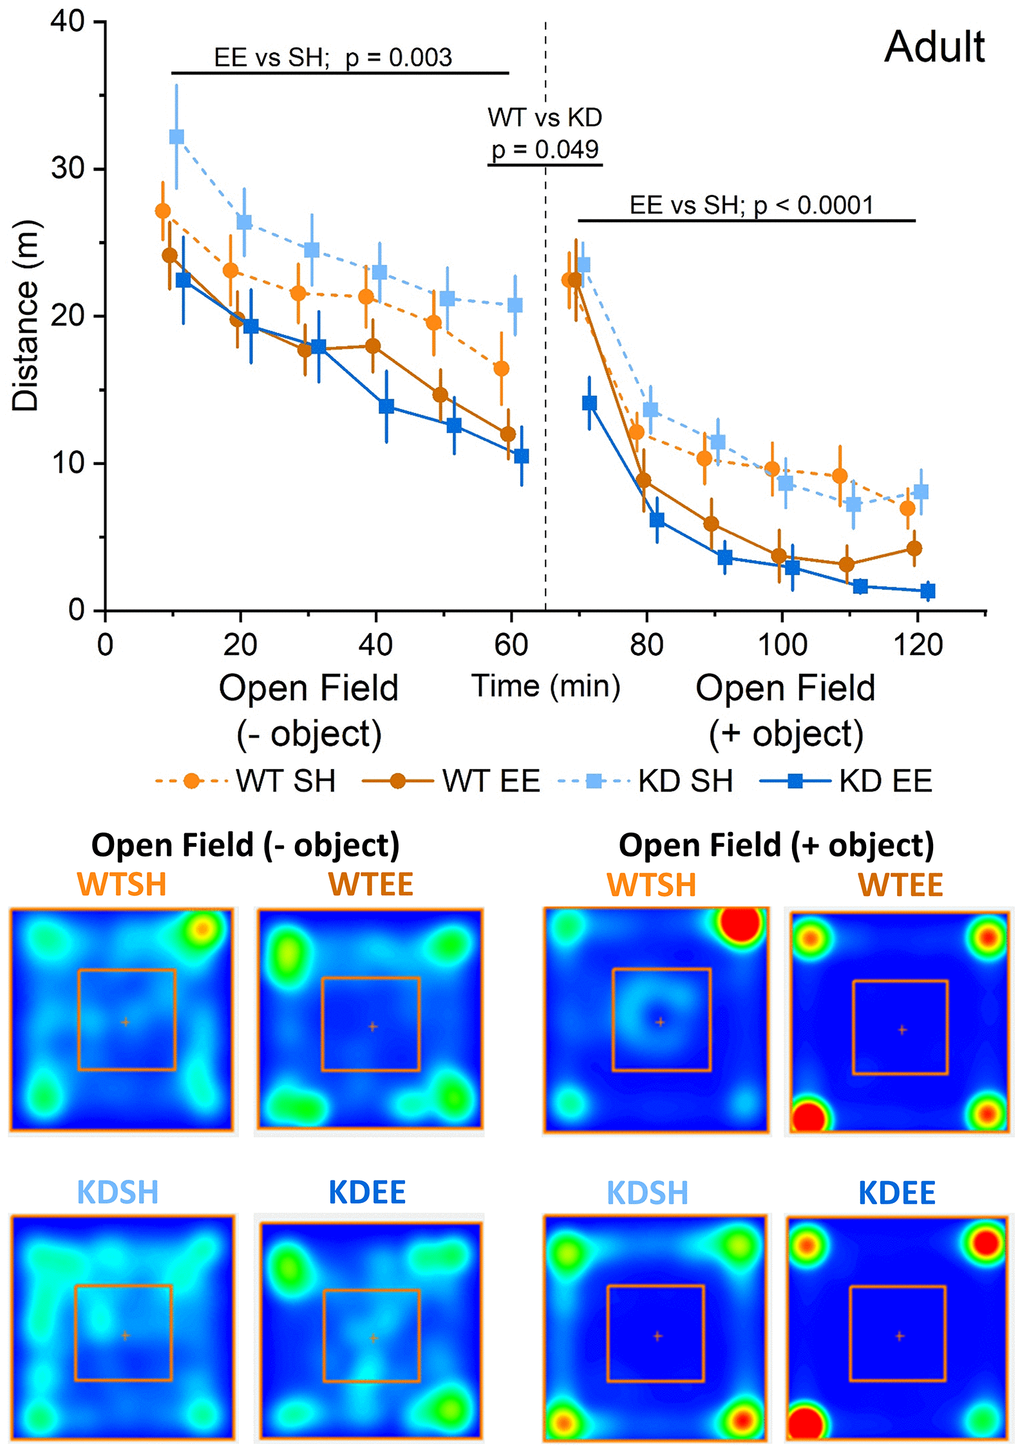 Enrichment reduces novelty-induced locomotion in adult mice. An RM-ANOVA on the open field task in the Adult groups showed an effect of Time for all groups (F(5,300) = 49.74, p p = 0.003) showing that mice in the enriched groups were less active regardless of their genotype. Following the introduction of an object into the arena (broken vertical line; 50 ml plastic Falcon tube), exploration increased from the previous level of activity at 60 mins. There was a borderline genotype effect (F(1,60) = 4.02, p = 0.049) with the WT group showing an enhanced response to novelty. Subsequently, enrichment reduced exploration in both genotypes following the introduction of an object, with a significant interaction of Time x Genotype x Housing (F(5,300) = 51.75 p = 0.012). In this open field + object stage an RM-ANOVA also showed an effect of Time for all groups (F(5,300) = 128.53, p p 